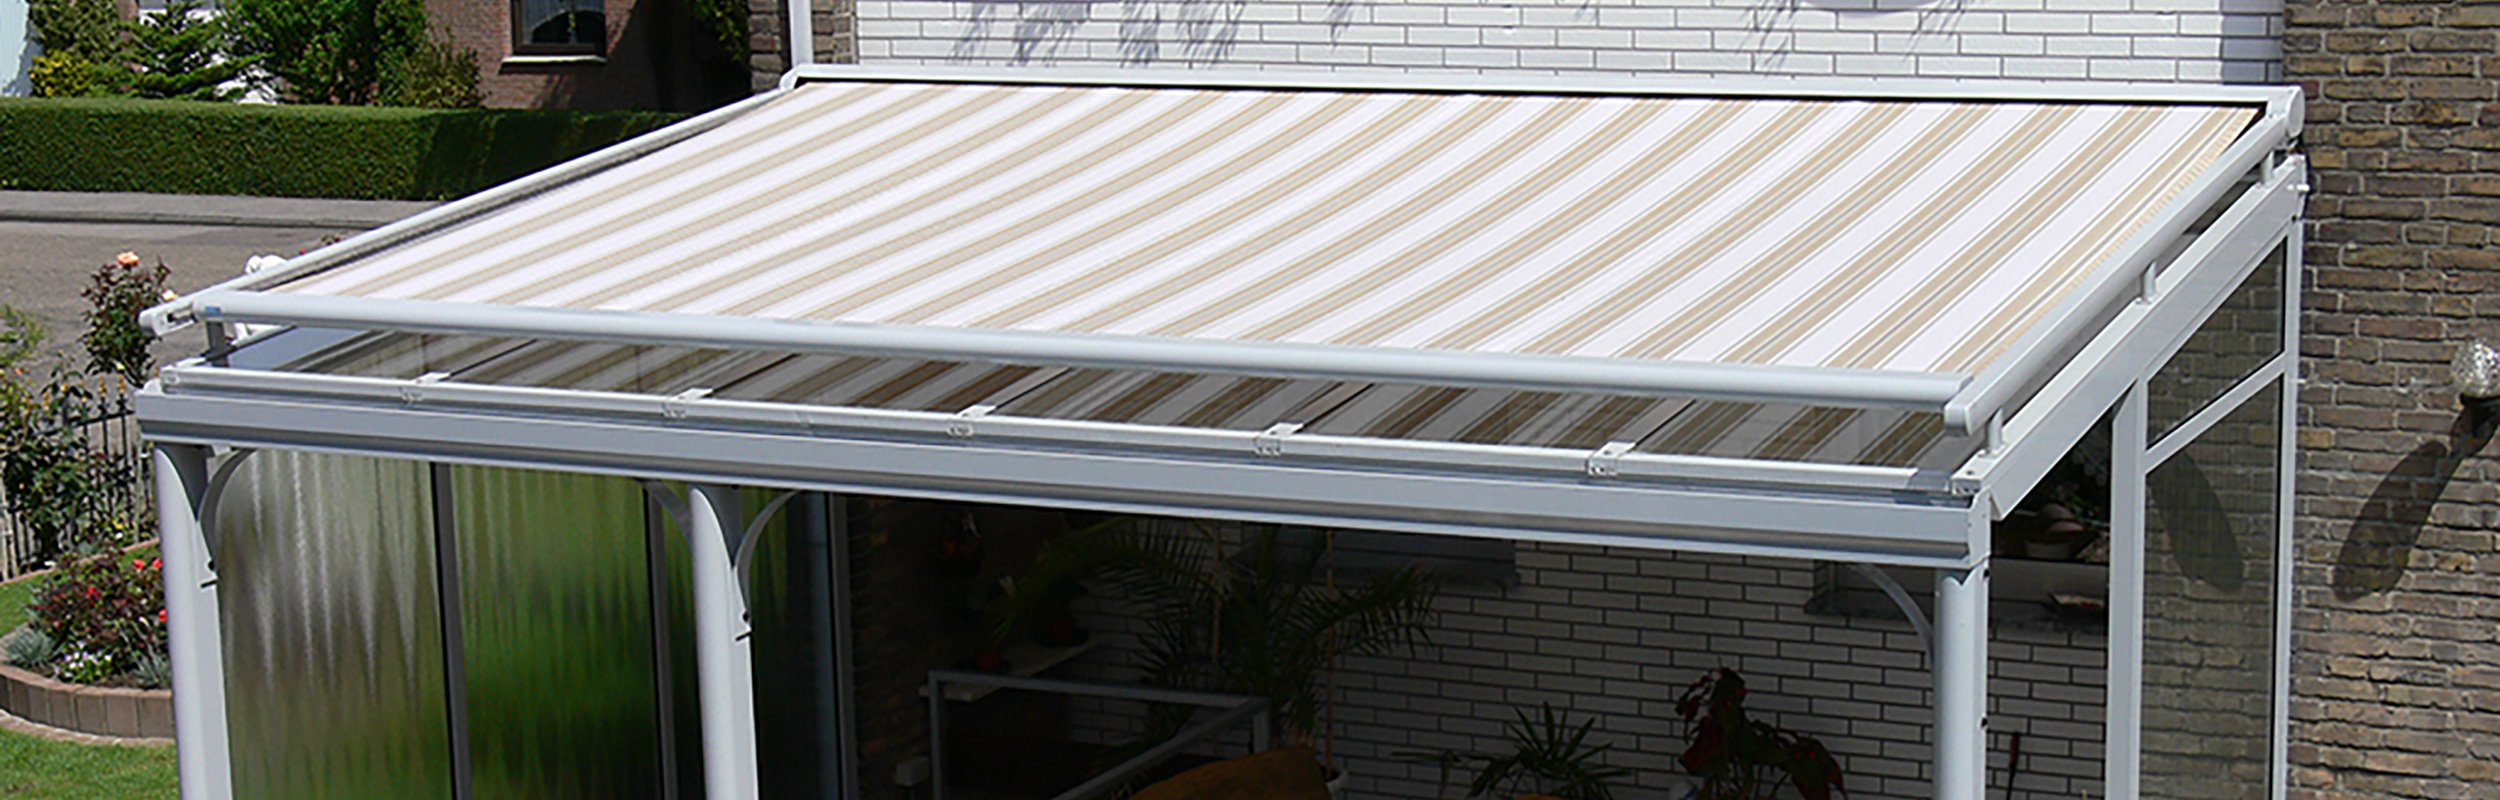 Roof awning